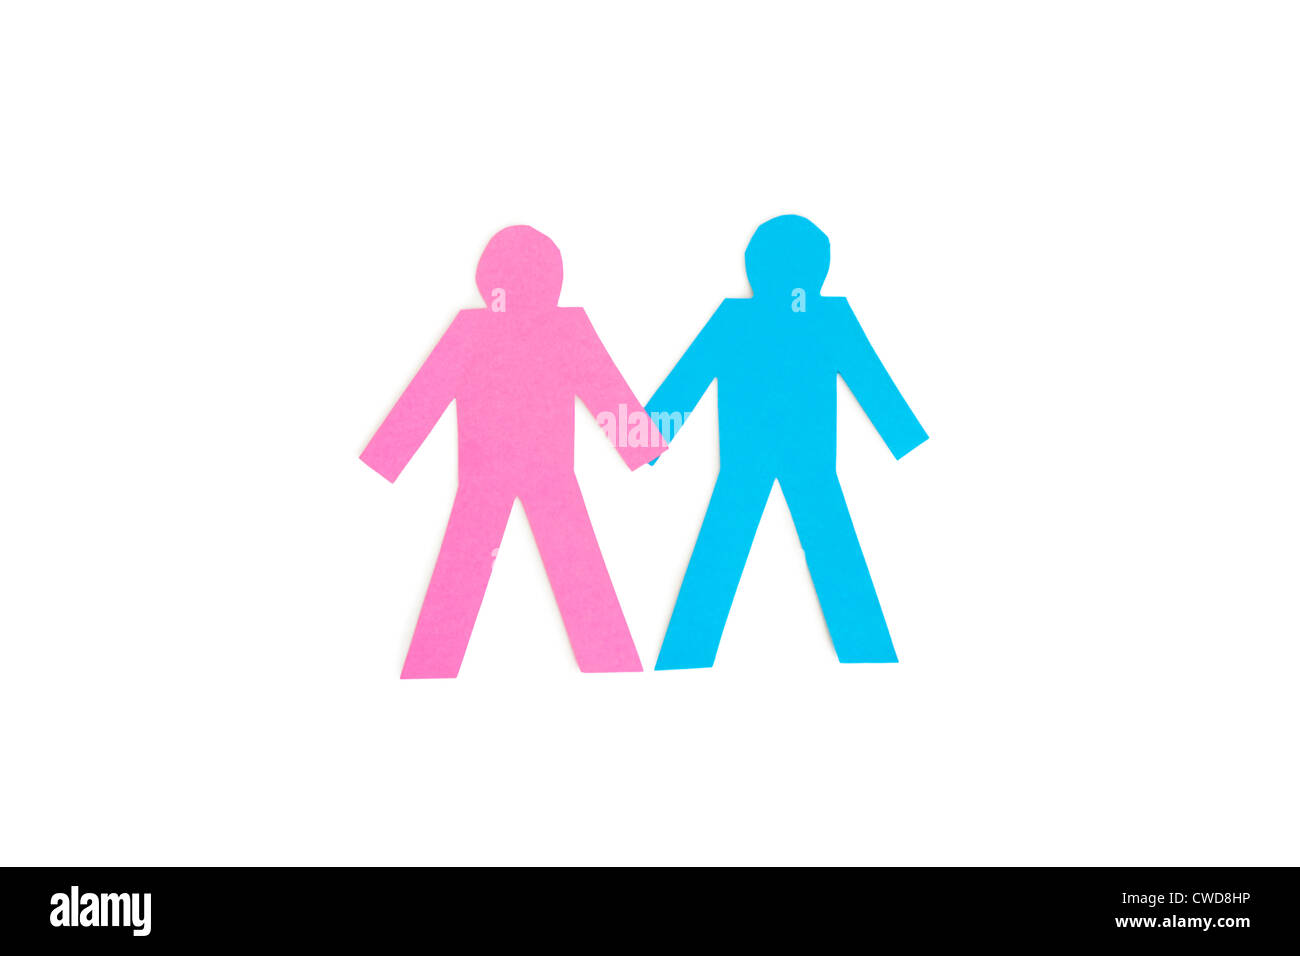 Paper cut out figures holding hands over white background Stock Photo